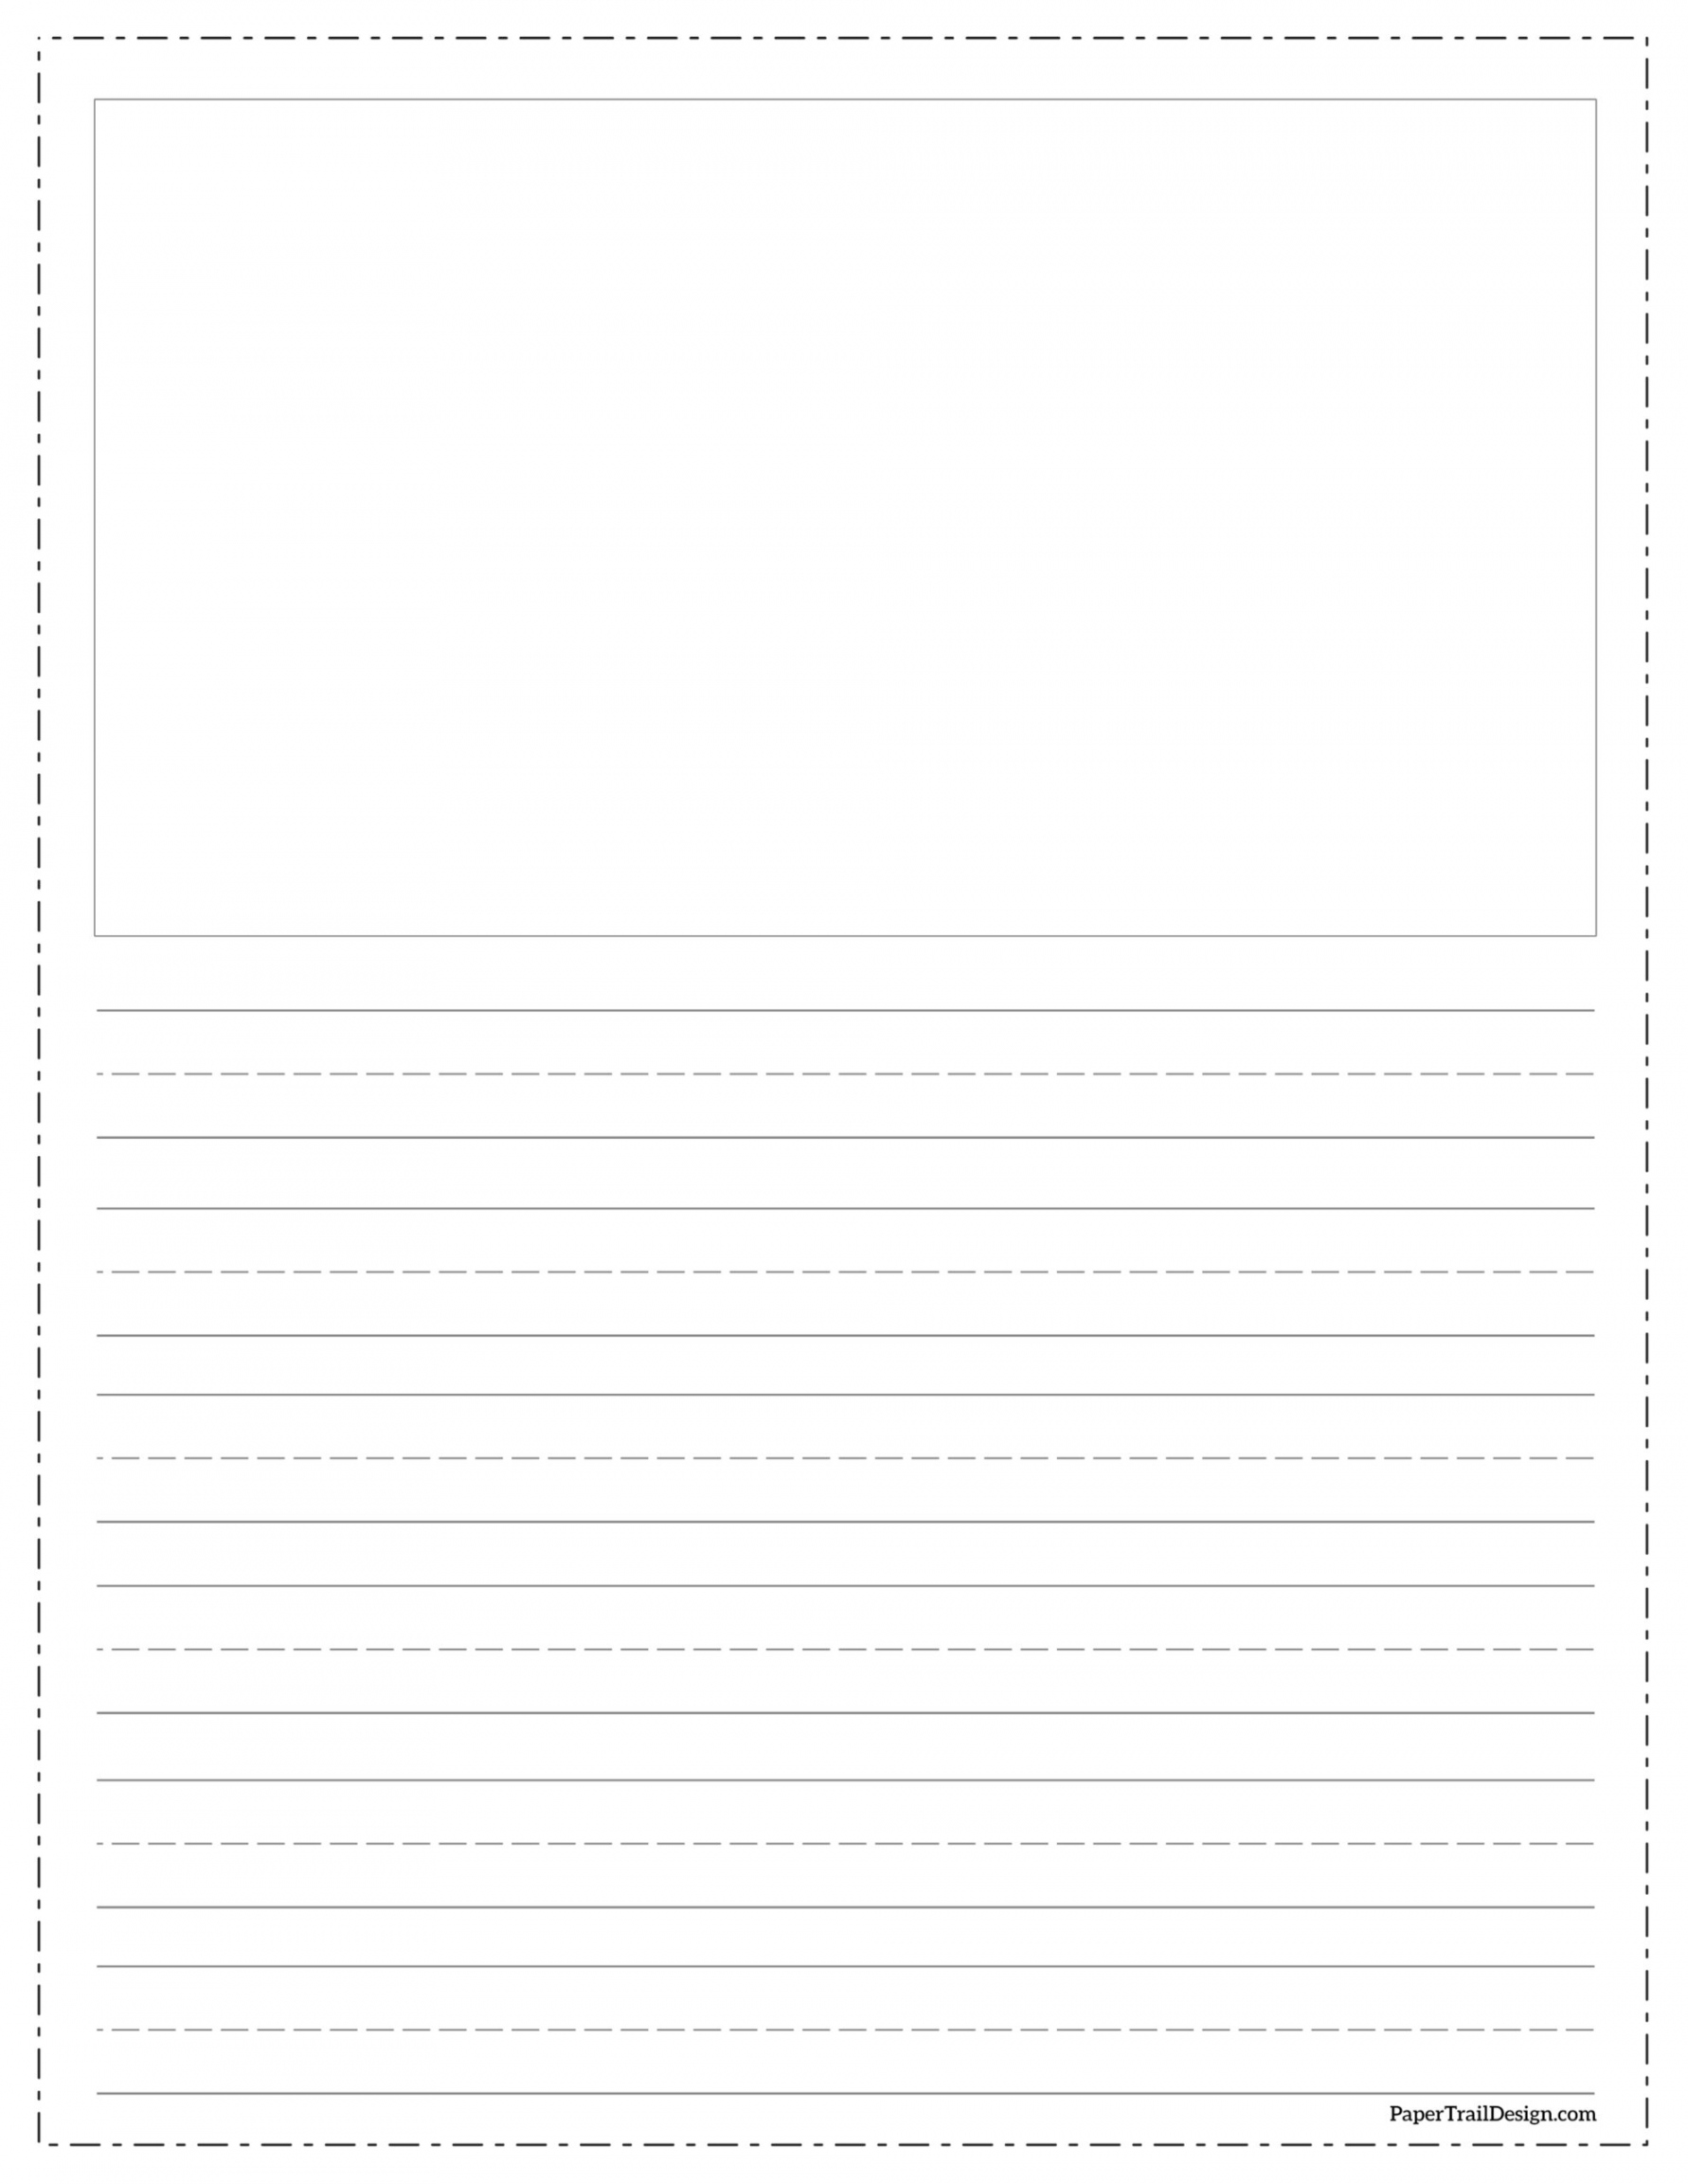 Free Printable Lined Writing Paper with Drawing Box - Paper Trail  - FREE Printables - Lined Paper With Picture Box